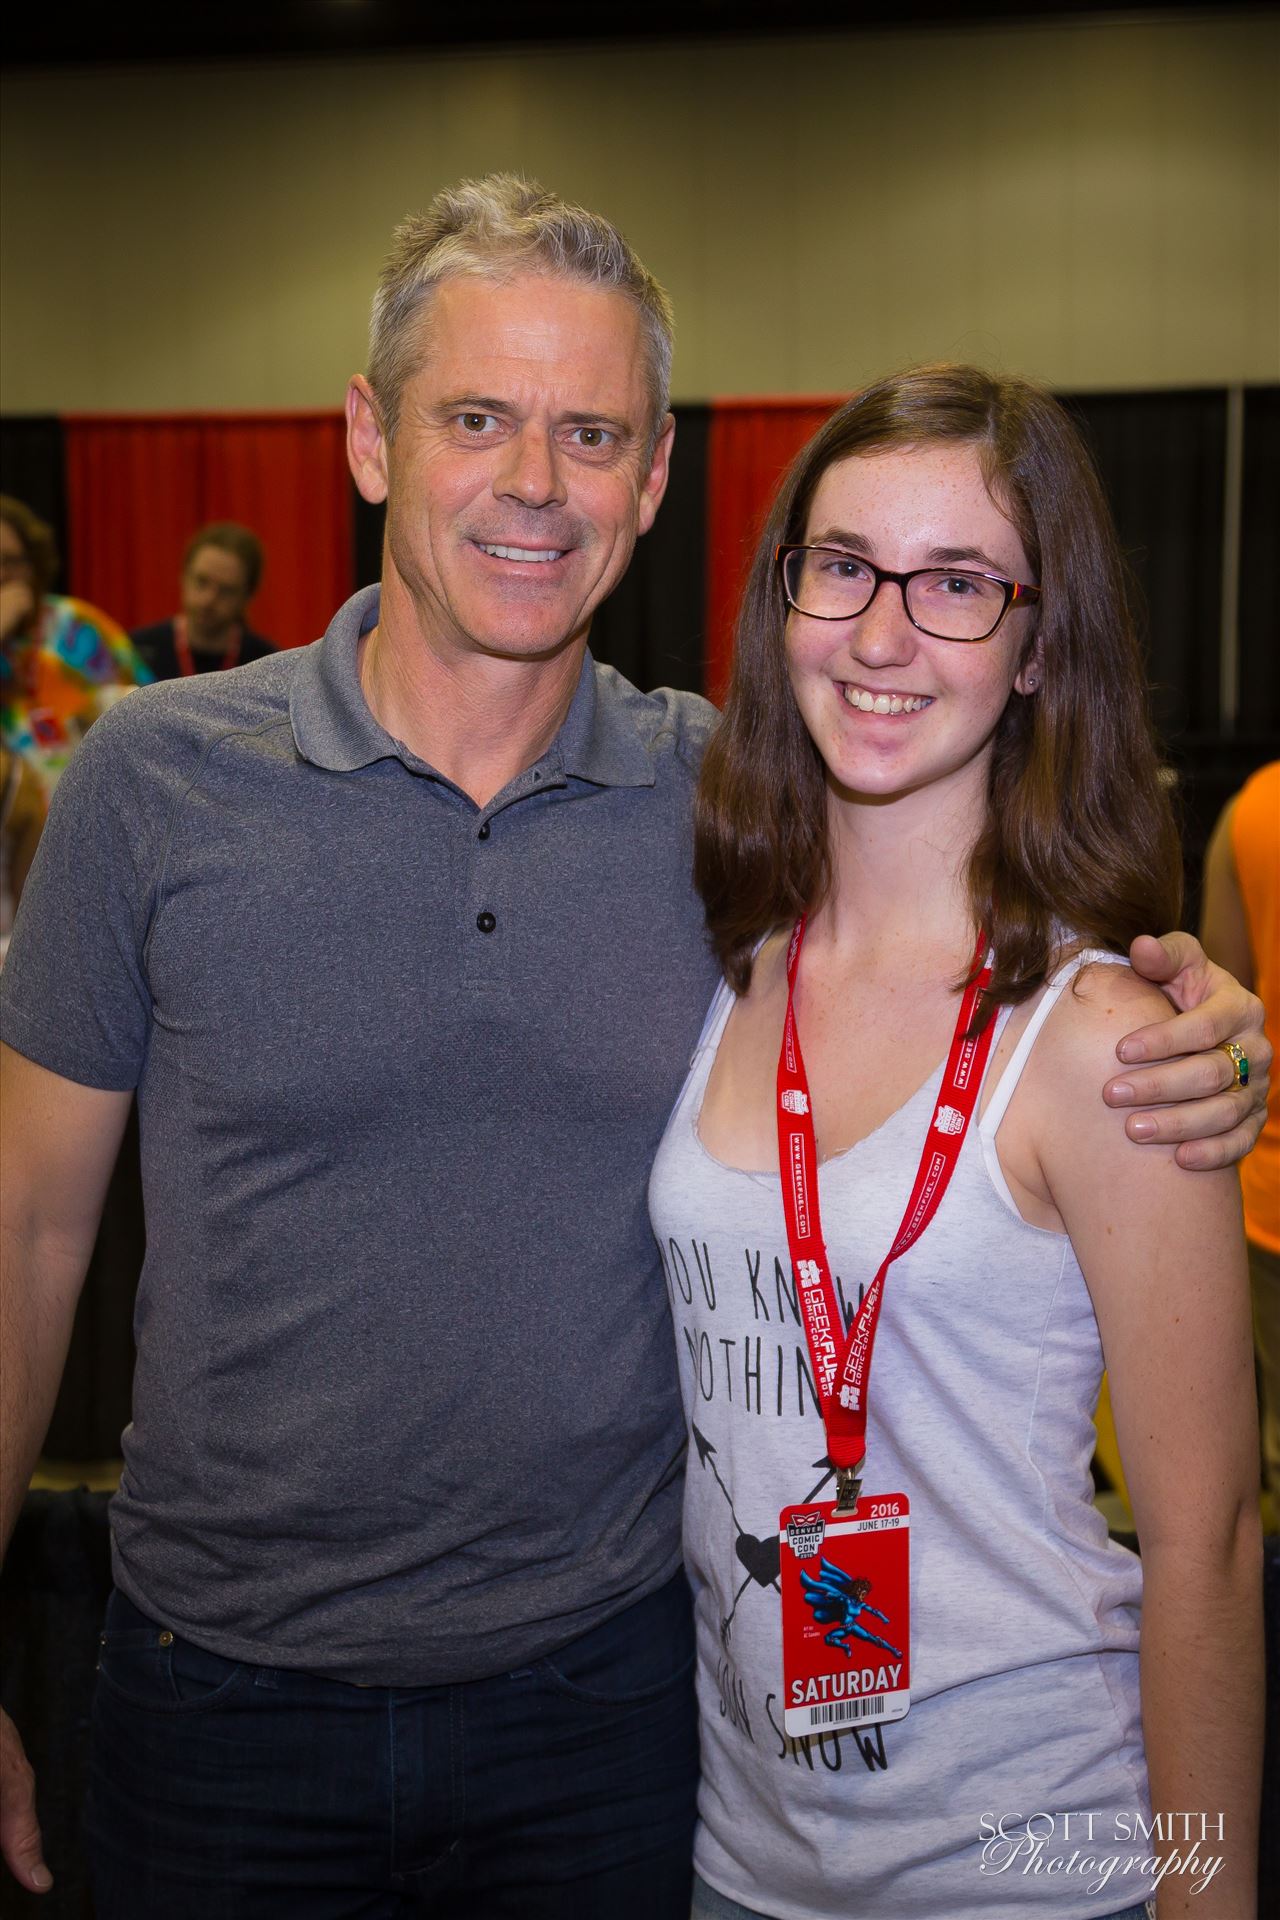 Denver Comic Con 2016 10 - Denver Comic Con 2016 at the Colorado Convention Center. C. Thomas Howell with my daughter. by Scott Smith Photos